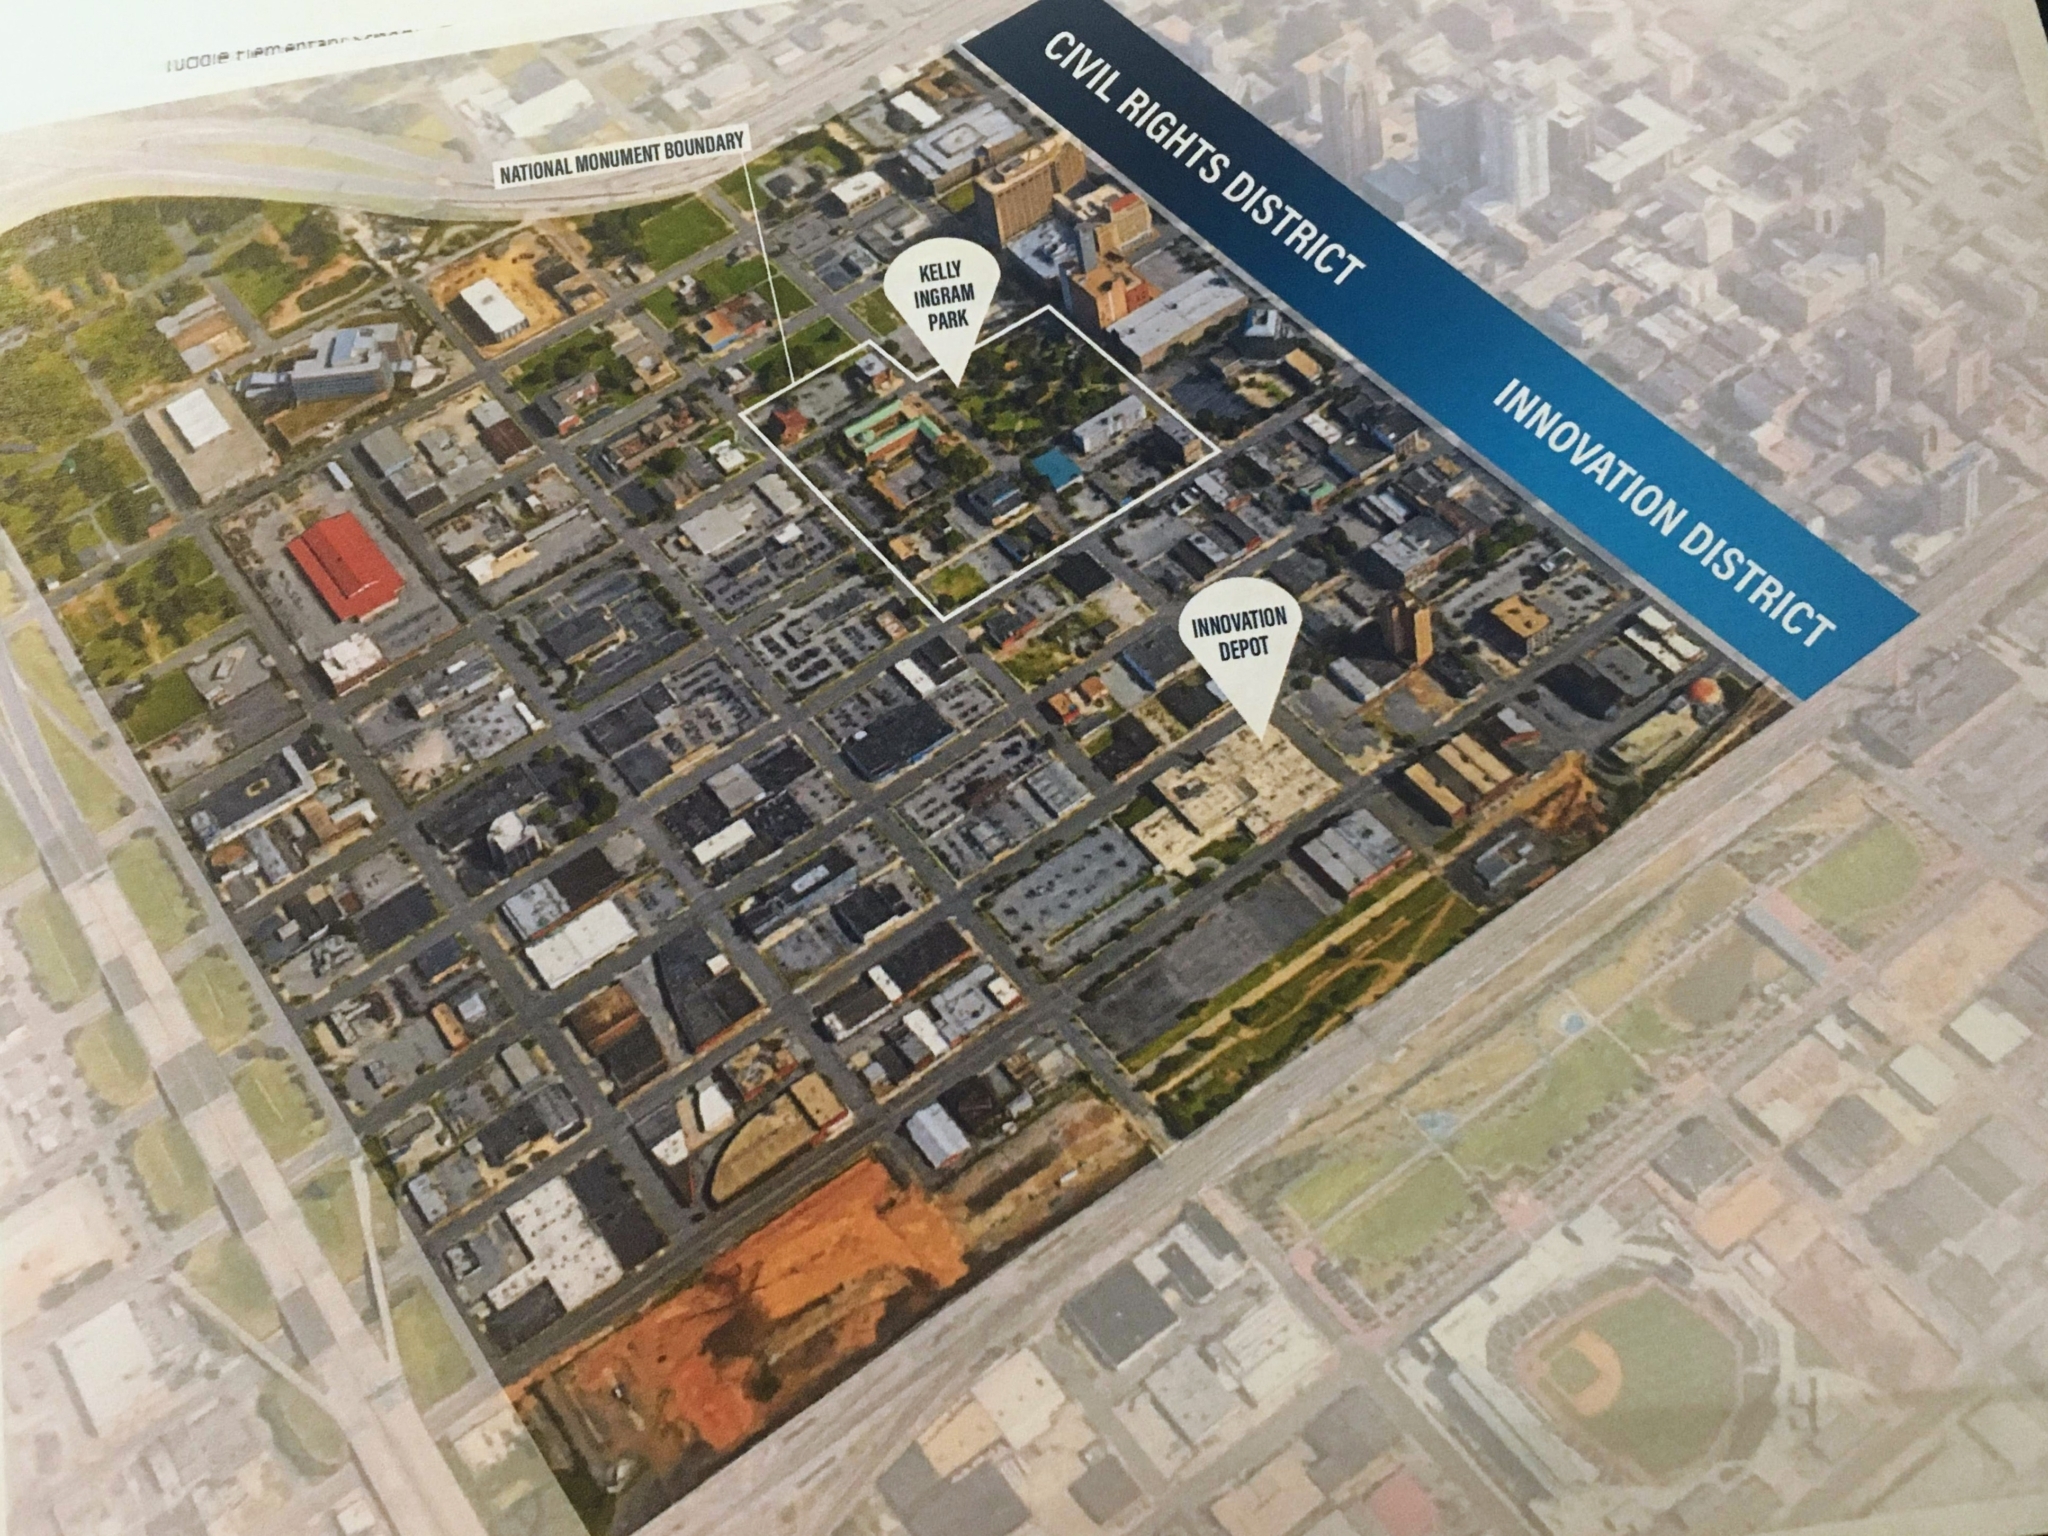 CRDIDmap "A destination for innovation." The Switch is coming to downtown Birmingham